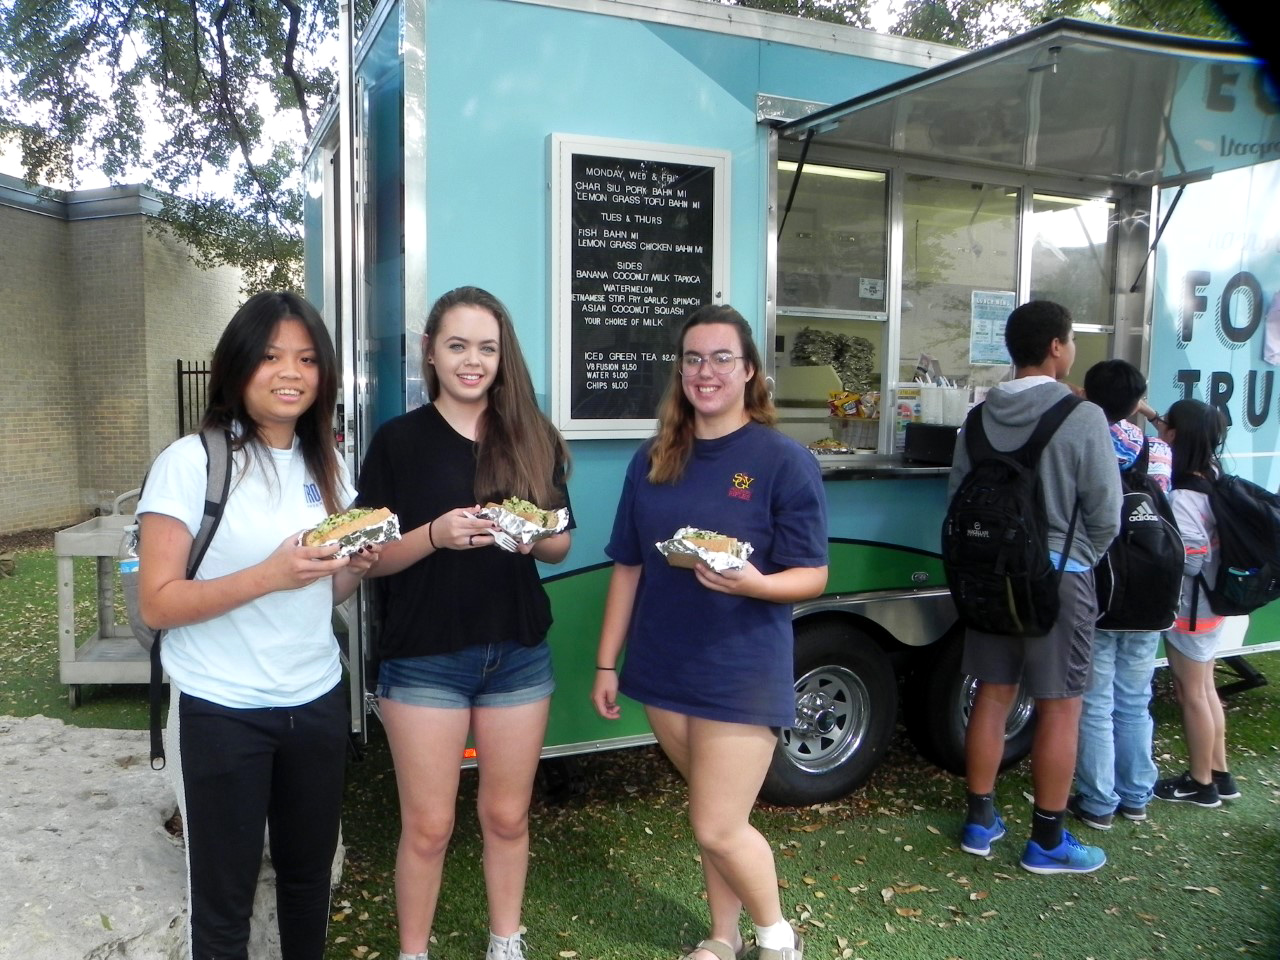 Junior Callie Quan and Sophomores Avery Ward and Elizabeth Gonzalez hold their lunch choices from the Food Truck. Callie, who is Vietnamese, states she’s usually very critical of Vietnamese food, but the food at the trailer is good. Avery is a vegetarian and the trailer staff fixes special items for her. Elizabeth, eating her first Bahn Mi and liking it, declares the food “really fresh.” Photo by Sarah Frankenfeld, Anderson HS